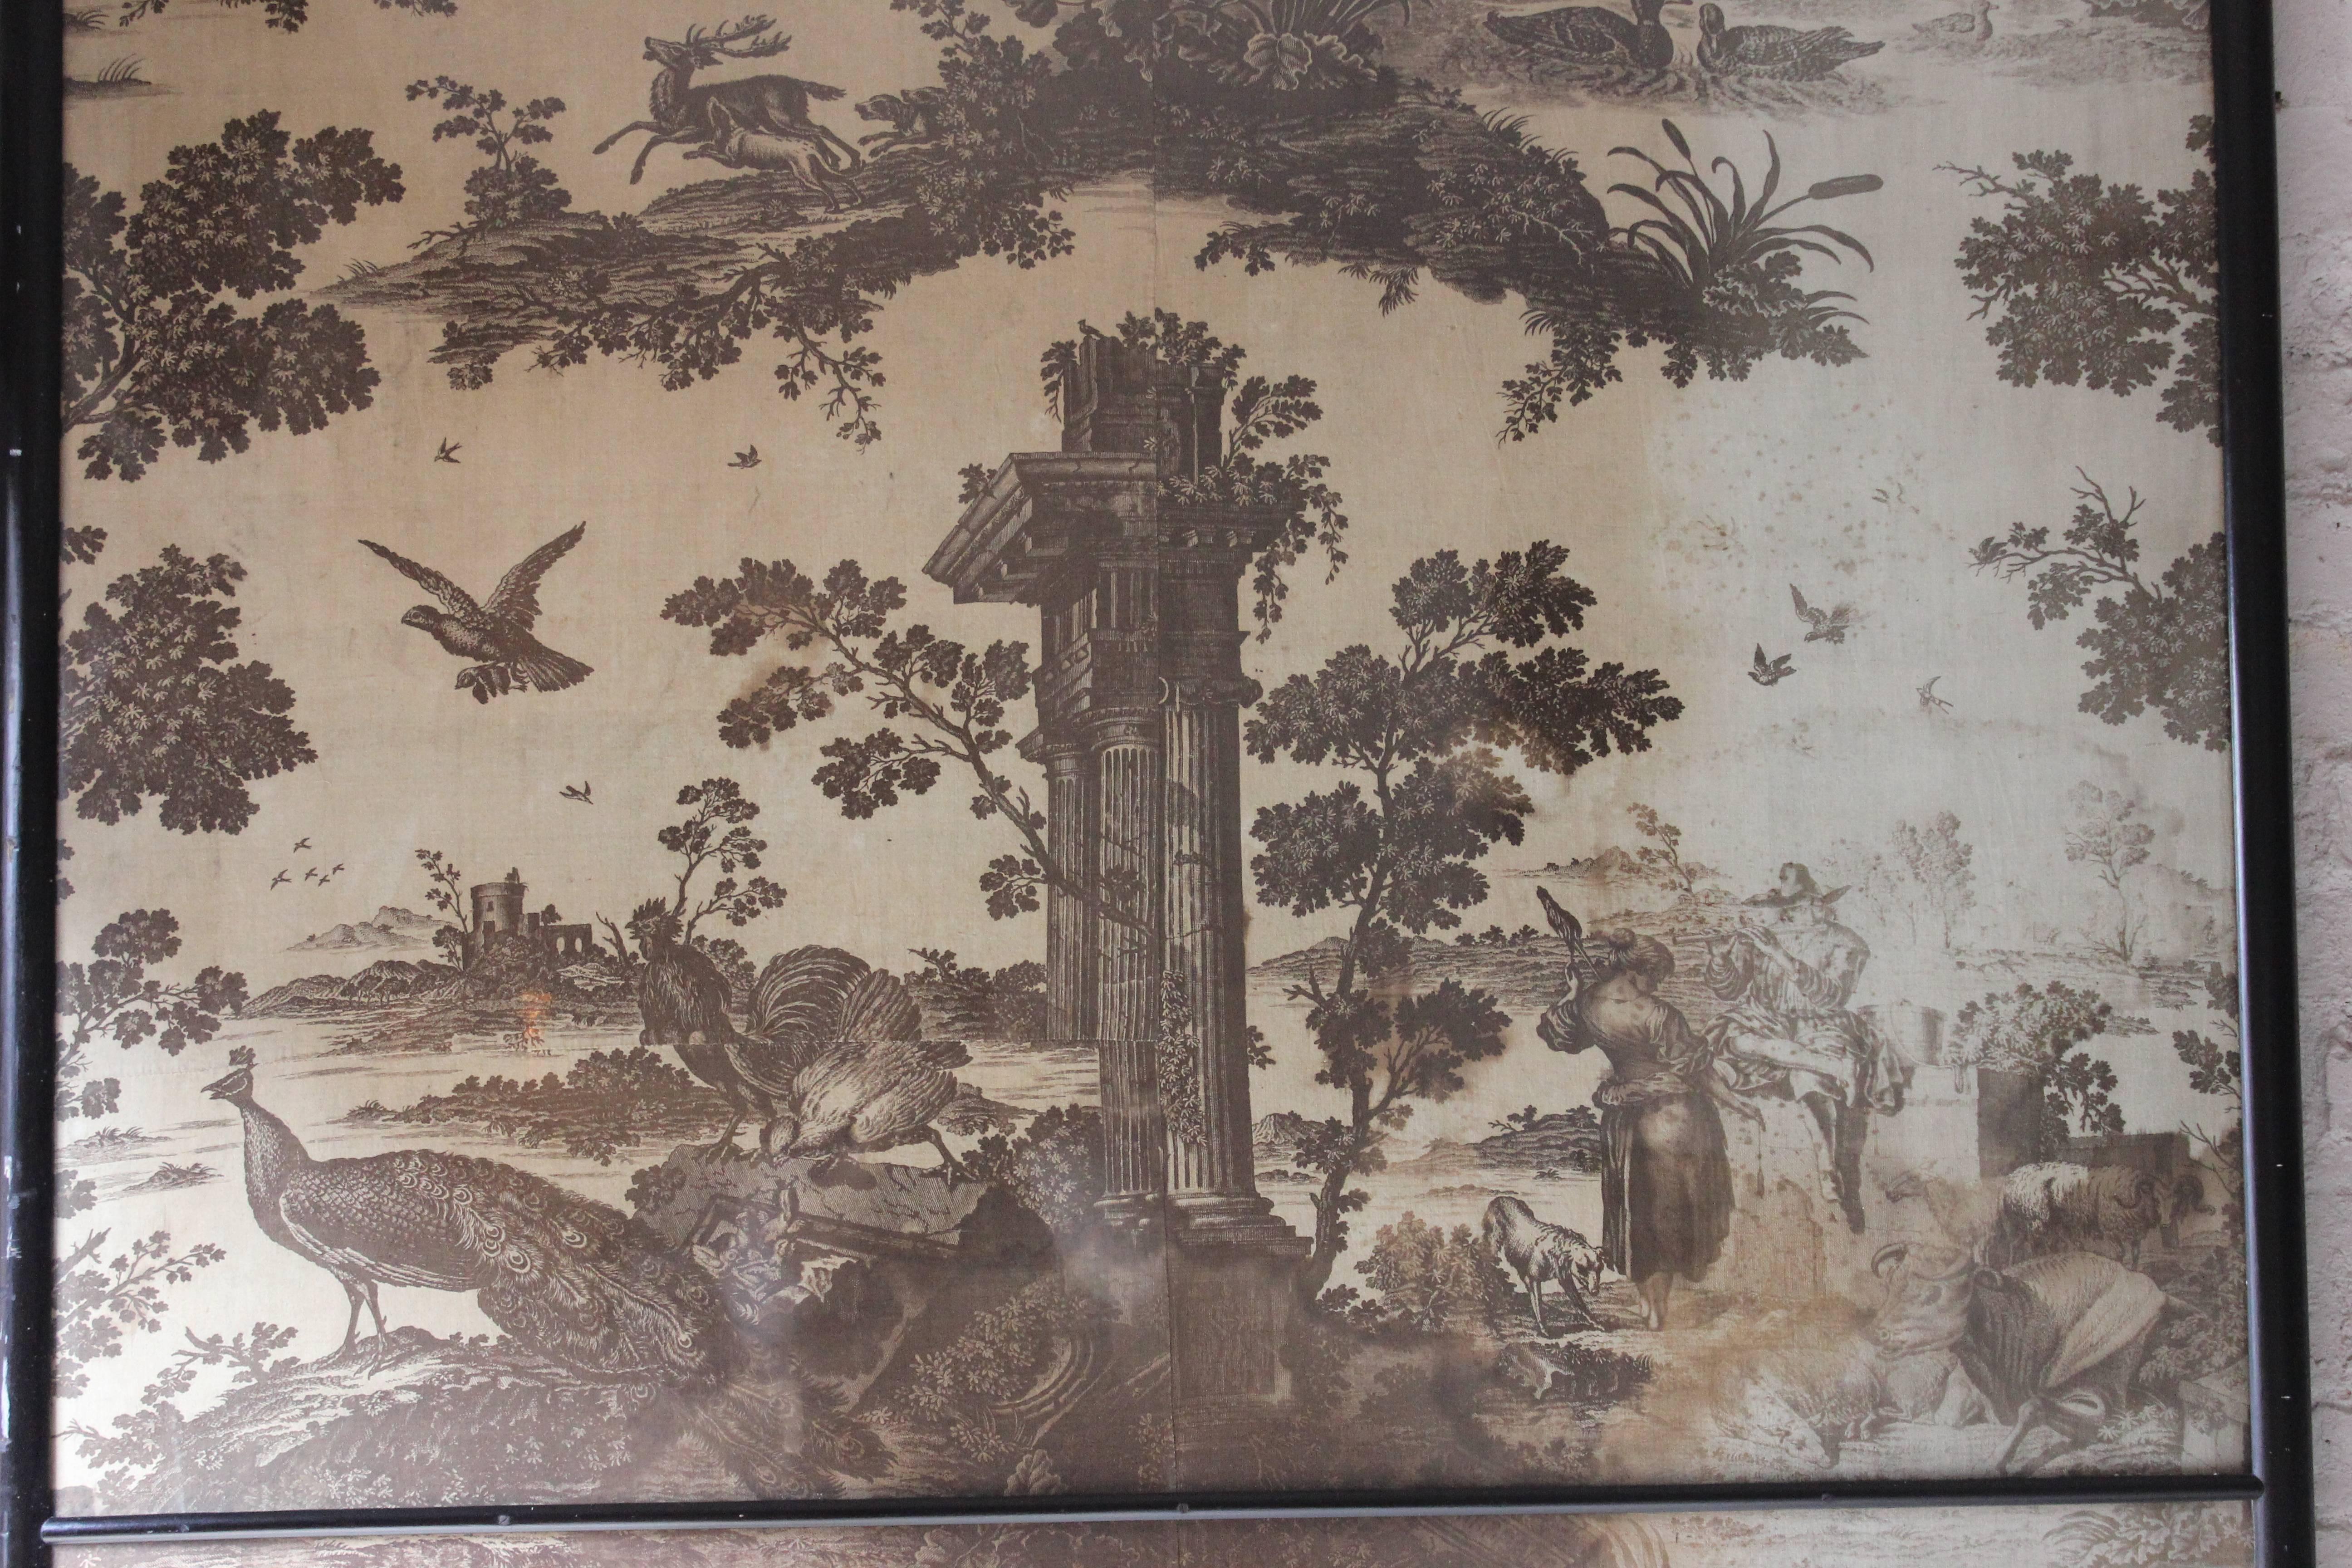 Large Framed Mid-18thC Section of 'Toiles de Jouy' Wall Covering; 'The Old Ford' 2